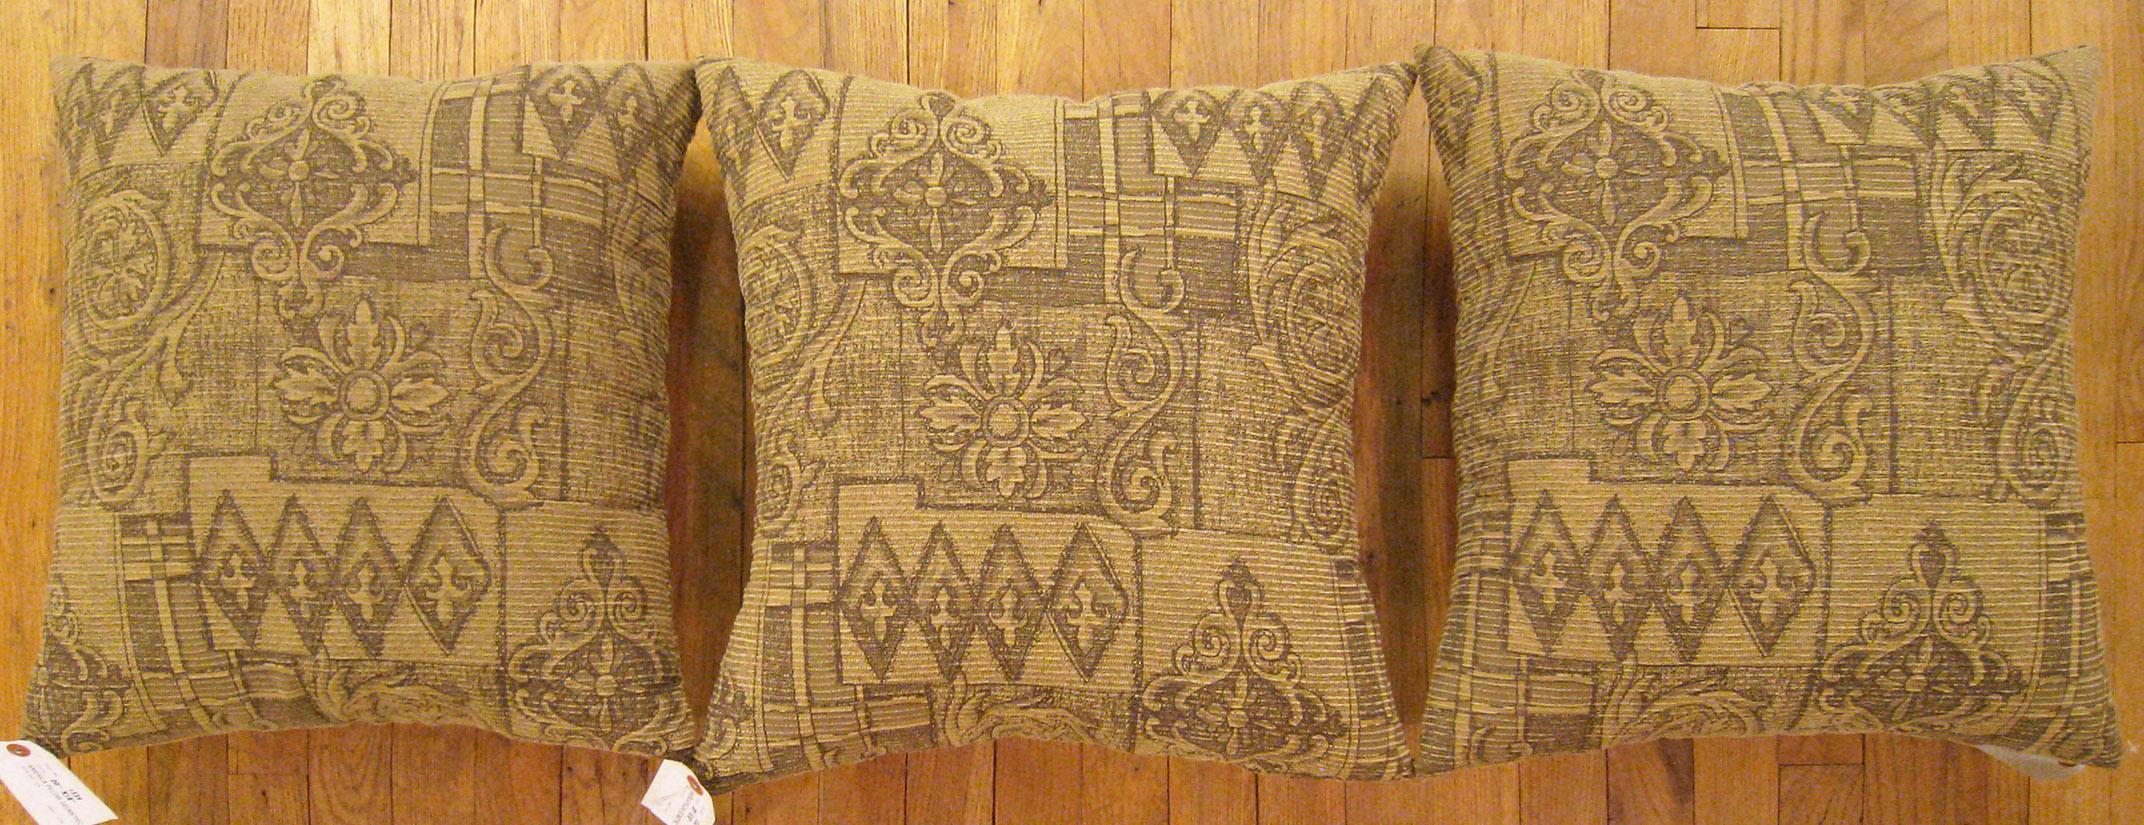 Hand-Woven A Set of Three Decorative Vintage Floro-Geometric Double-Sided Fabric Pillows For Sale